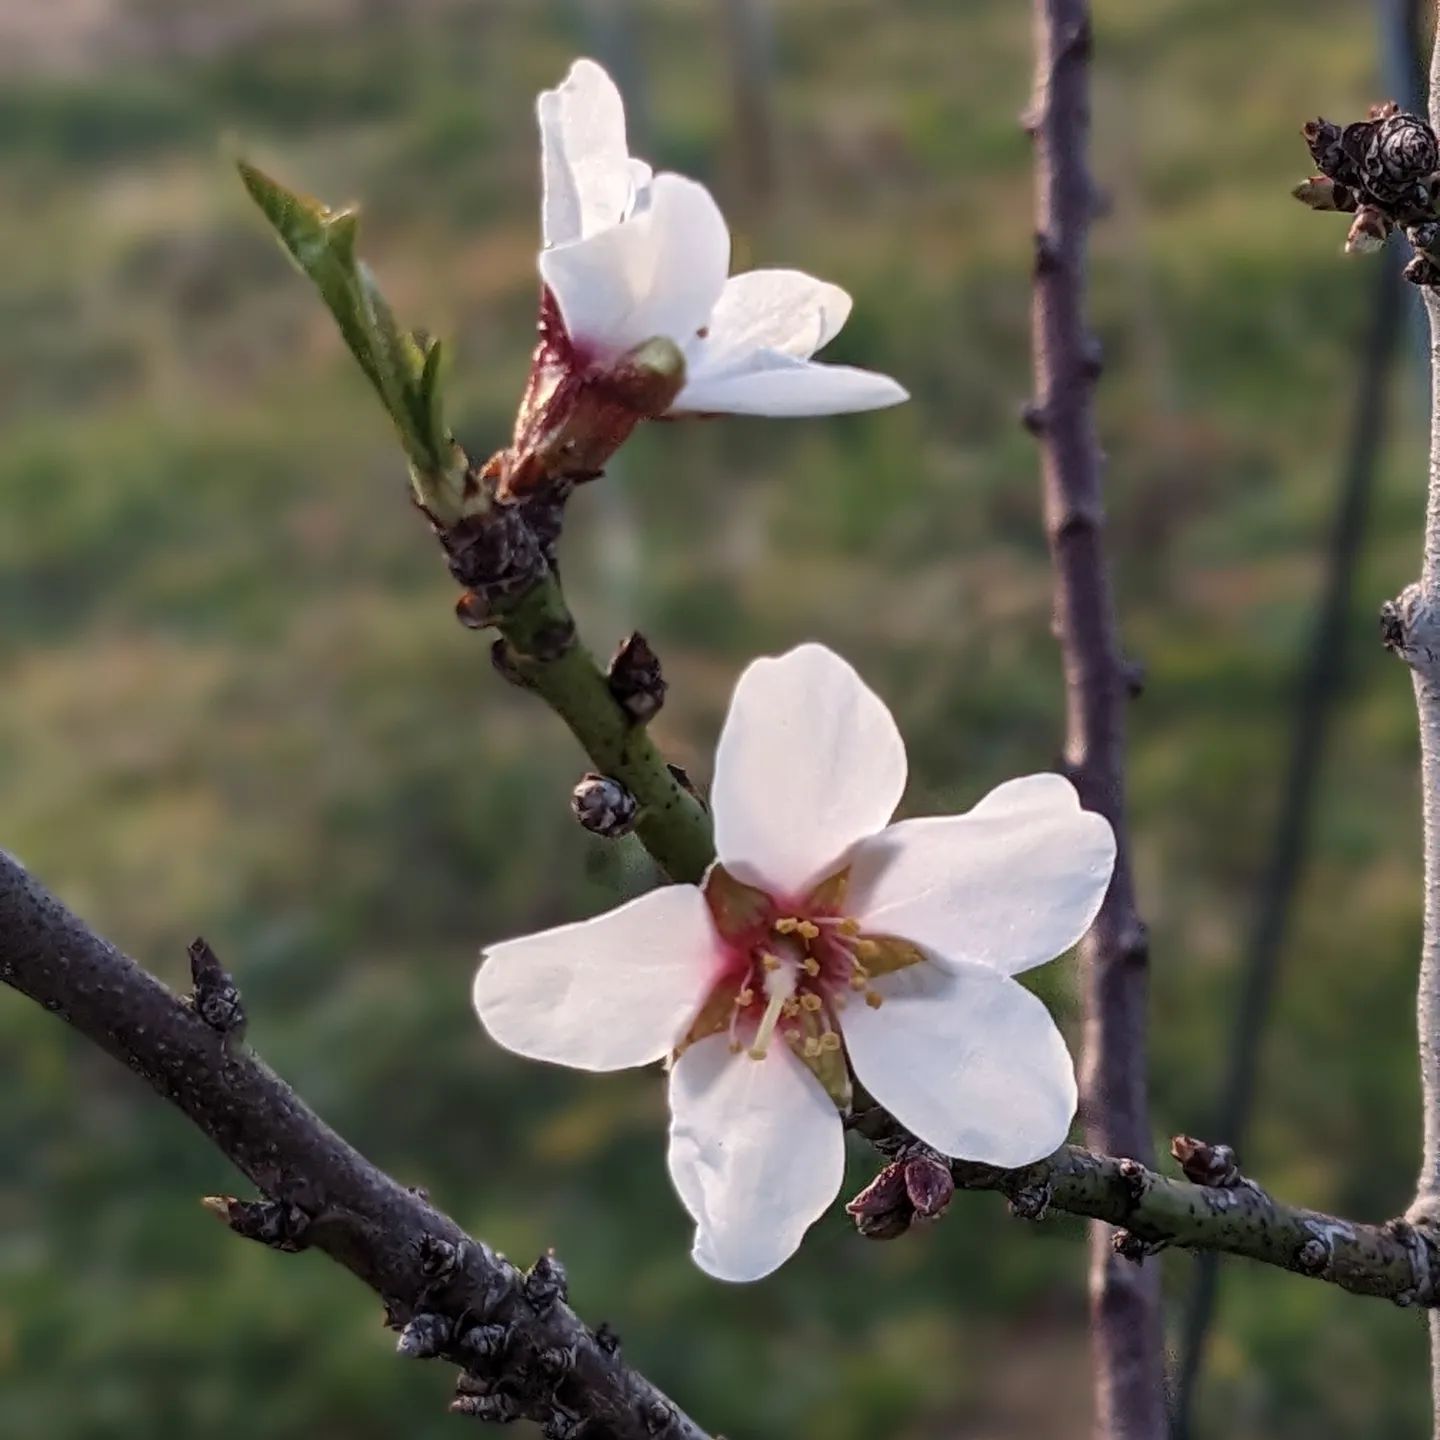 Ah, what a joy to welcome the almond tree flowers